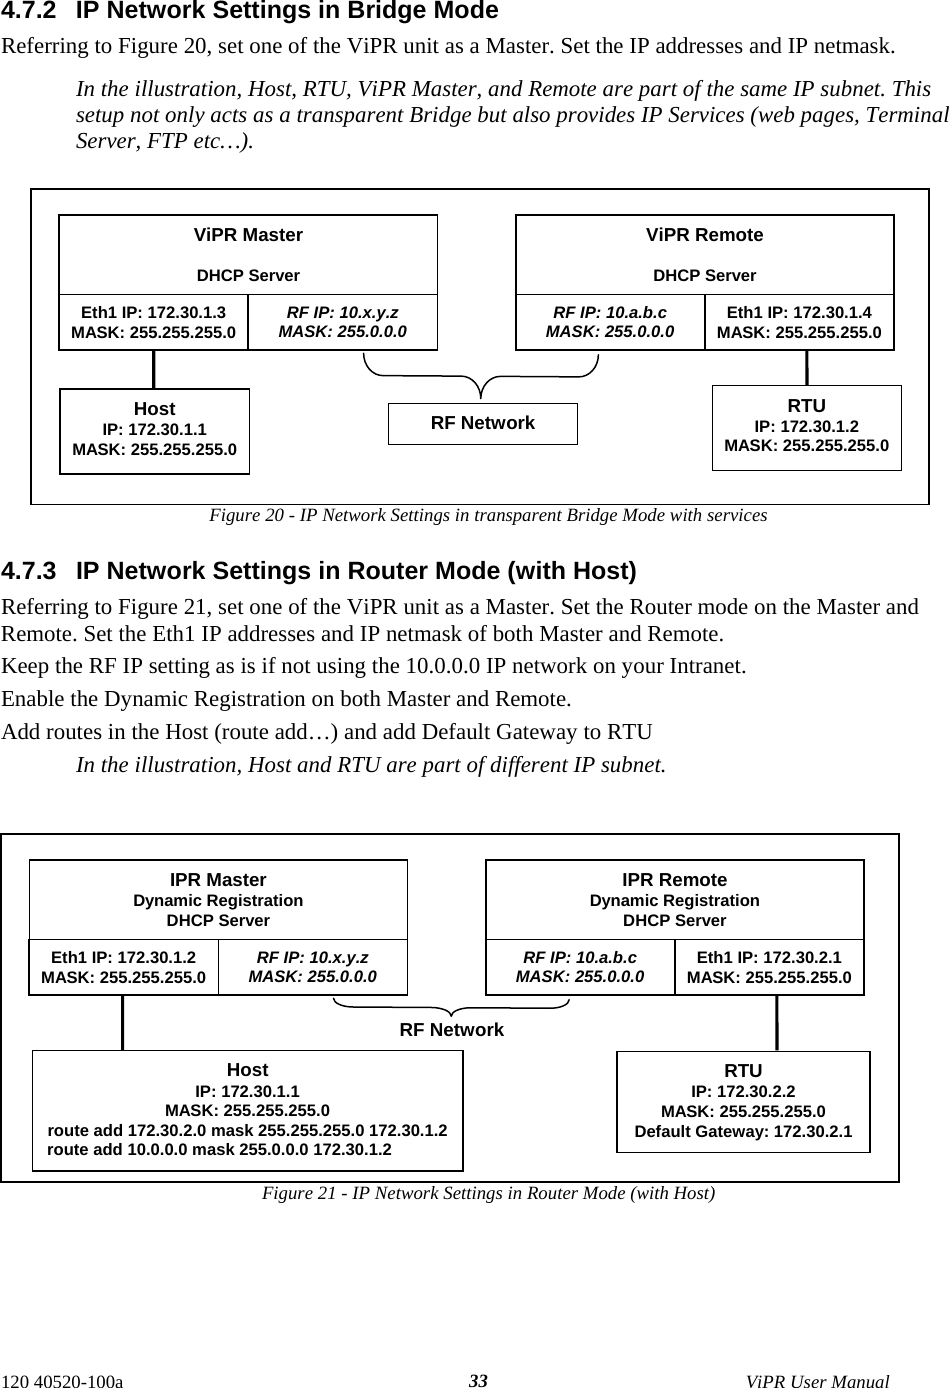  4.7.2  IP Network Settings in Bridge Mode Referring to Figure 20, set one of the ViPR unit as a Master. Set the IP addresses and IP netmask. In the illustration, Host, RTU, ViPR Master, and Remote are part of the same IP subnet. This setup not only acts as a transparent Bridge but also provides IP Services (web pages, Terminal Server, FTP etc…). Figure 20 - IP Network Settings in transparent Bridge Mode with services  ViPR Master  DHCP Server Eth1 IP: 172.30.1.3 MASK: 255.255.255.0  RF IP: 10.x.y.z MASK: 255.0.0.0 ViPR Remote  DHCP Server RF IP: 10.a.b.c MASK: 255.0.0.0 Eth1 IP: 172.30.1.4 MASK: 255.255.255.0RF Network Host IP: 172.30.1.1 MASK: 255.255.255.0 RTU IP: 172.30.1.2 MASK: 255.255.255.0 4.7.3  IP Network Settings in Router Mode (with Host) Referring to Figure 21, set one of the ViPR unit as a Master. Set the Router mode on the Master and Remote. Set the Eth1 IP addresses and IP netmask of both Master and Remote. Keep the RF IP setting as is if not using the 10.0.0.0 IP network on your Intranet. Enable the Dynamic Registration on both Master and Remote. Add routes in the Host (route add…) and add Default Gateway to RTU  In the illustration, Host and RTU are part of different IP subnet.  Figure 21 - IP Network Settings in Router Mode (with Host)  IPR Master Dynamic Registration DHCP Server Eth1 IP: 172.30.1.2 MASK: 255.255.255.0  RF IP: 10.x.y.z MASK: 255.0.0.0 IPR Remote Dynamic Registration DHCP Server RF IP: 10.a.b.c MASK: 255.0.0.0 Eth1 IP: 172.30.2.1 MASK: 255.255.255.0 RF Network Host IP: 172.30.1.1 MASK: 255.255.255.0 route add 172.30.2.0 mask 255.255.255.0 172.30.1.2    route add 10.0.0.0 mask 255.0.0.0 172.30.1.2 RTU IP: 172.30.2.2 MASK: 255.255.255.0 Default Gateway: 172.30.2.1 120 40520-100a    ViPR User Manual  33